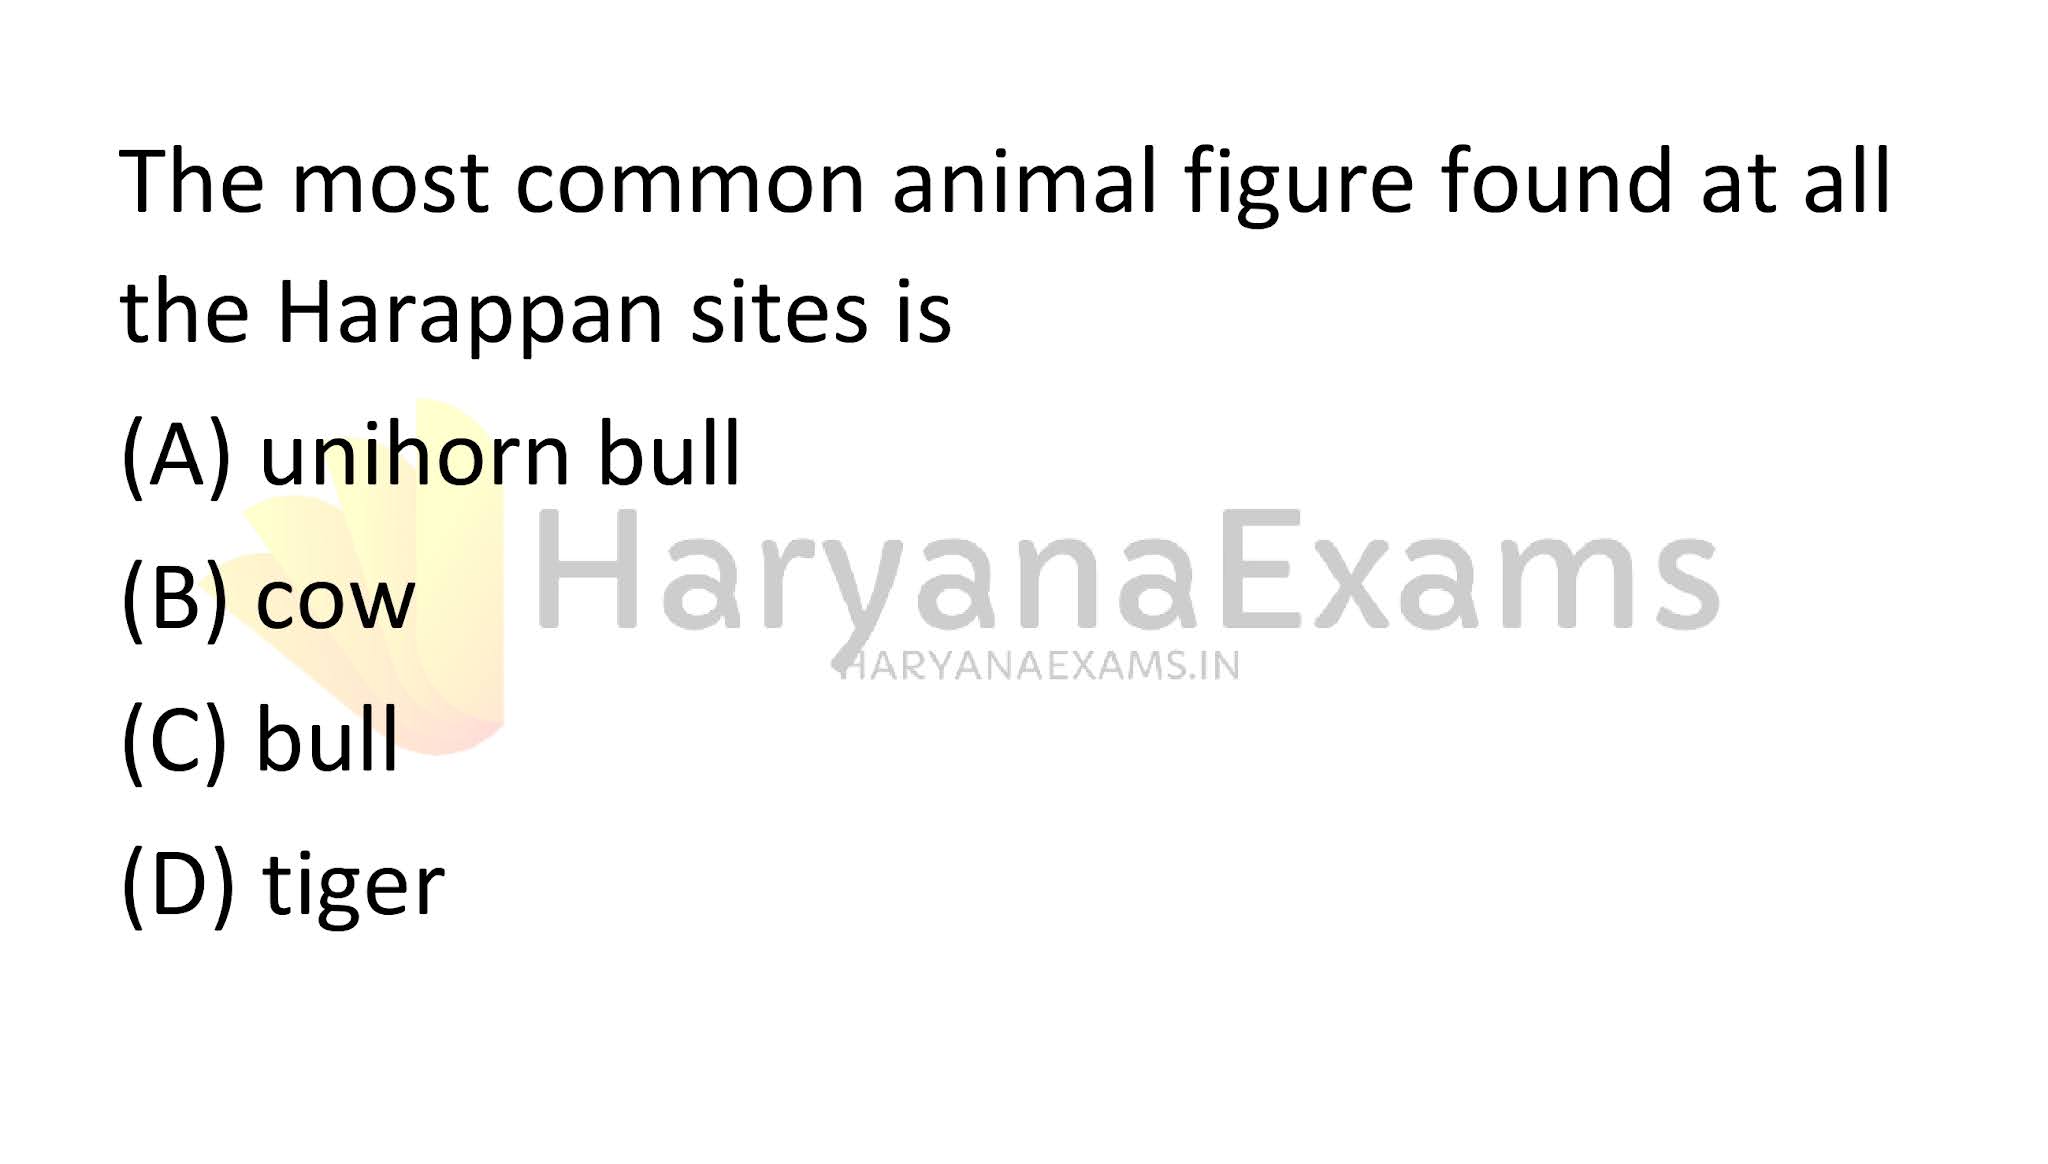 The most common animal figure found at all the Harappan sites is